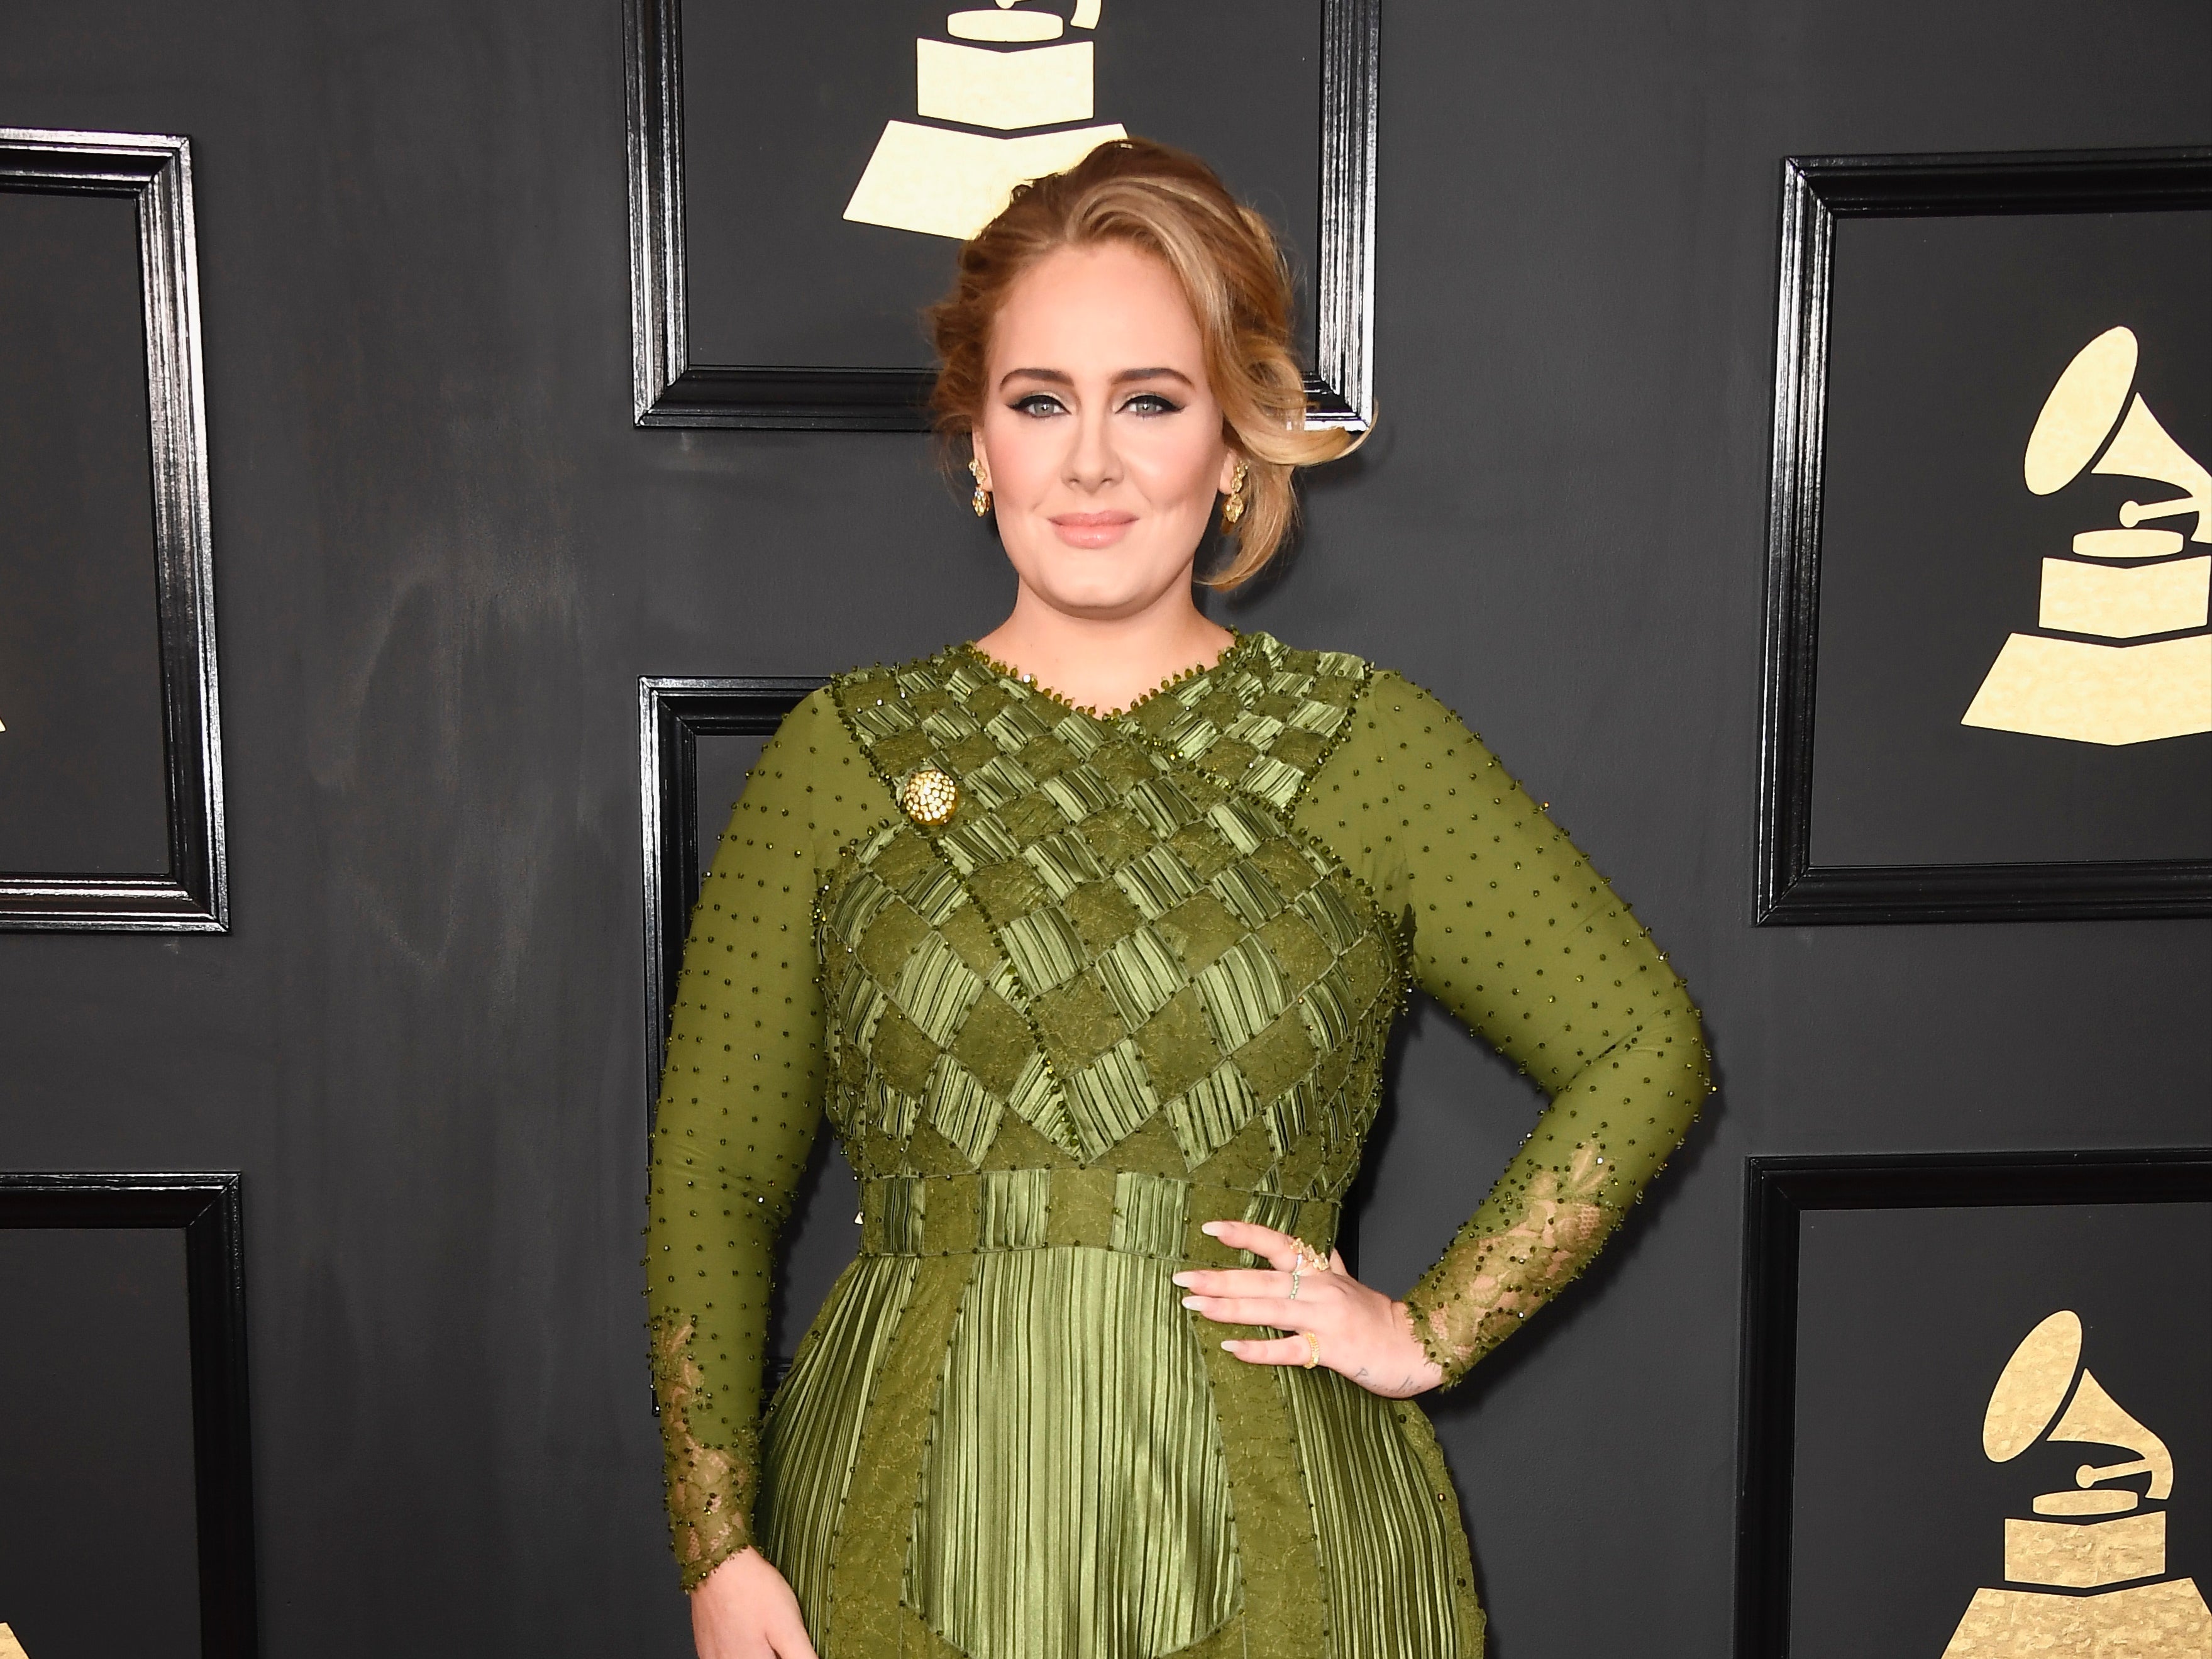 Adele opens up about weight loss and public’s perception to appearance